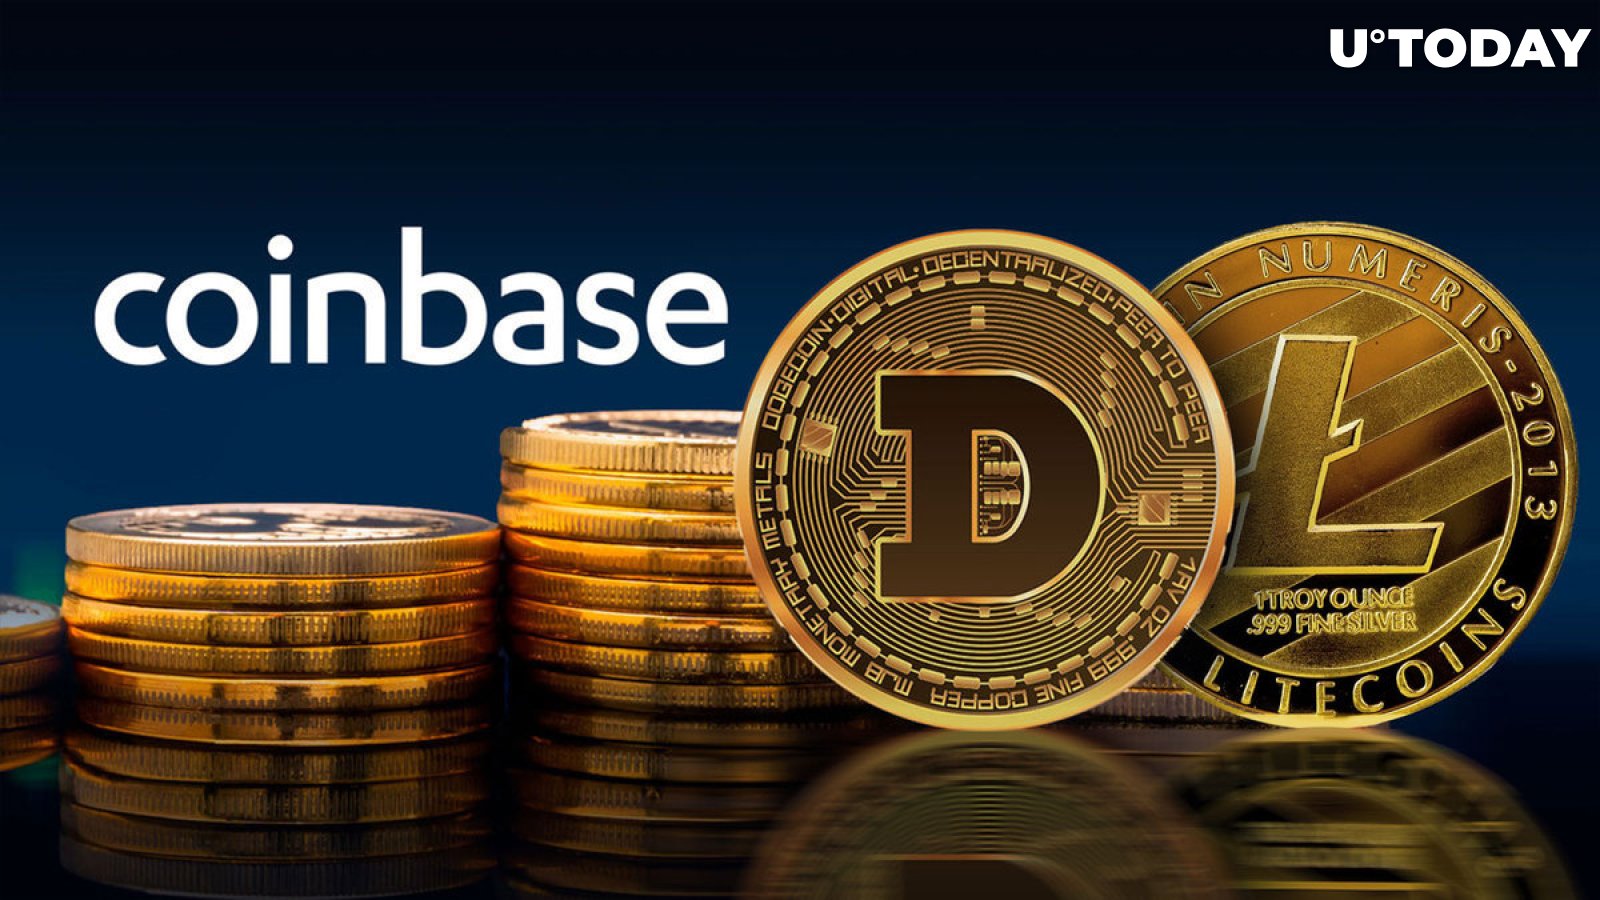 Coinbase Commerce Delisting of DOGE and LTC; What's Behind Move?